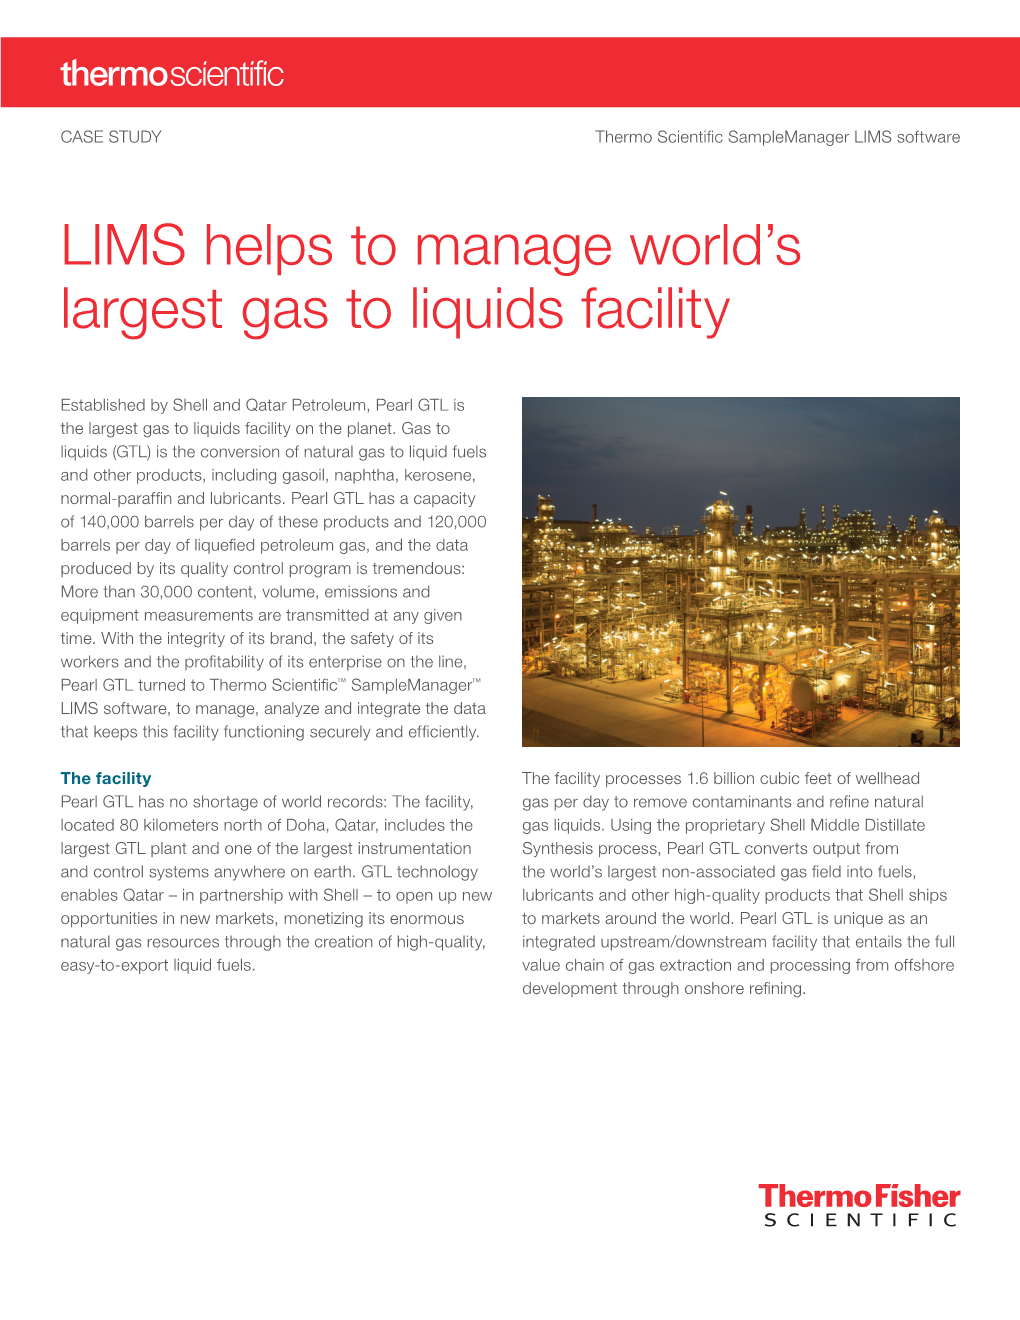 The World's Largest Gas to Liquids Facility Runs on Thermo Fisher